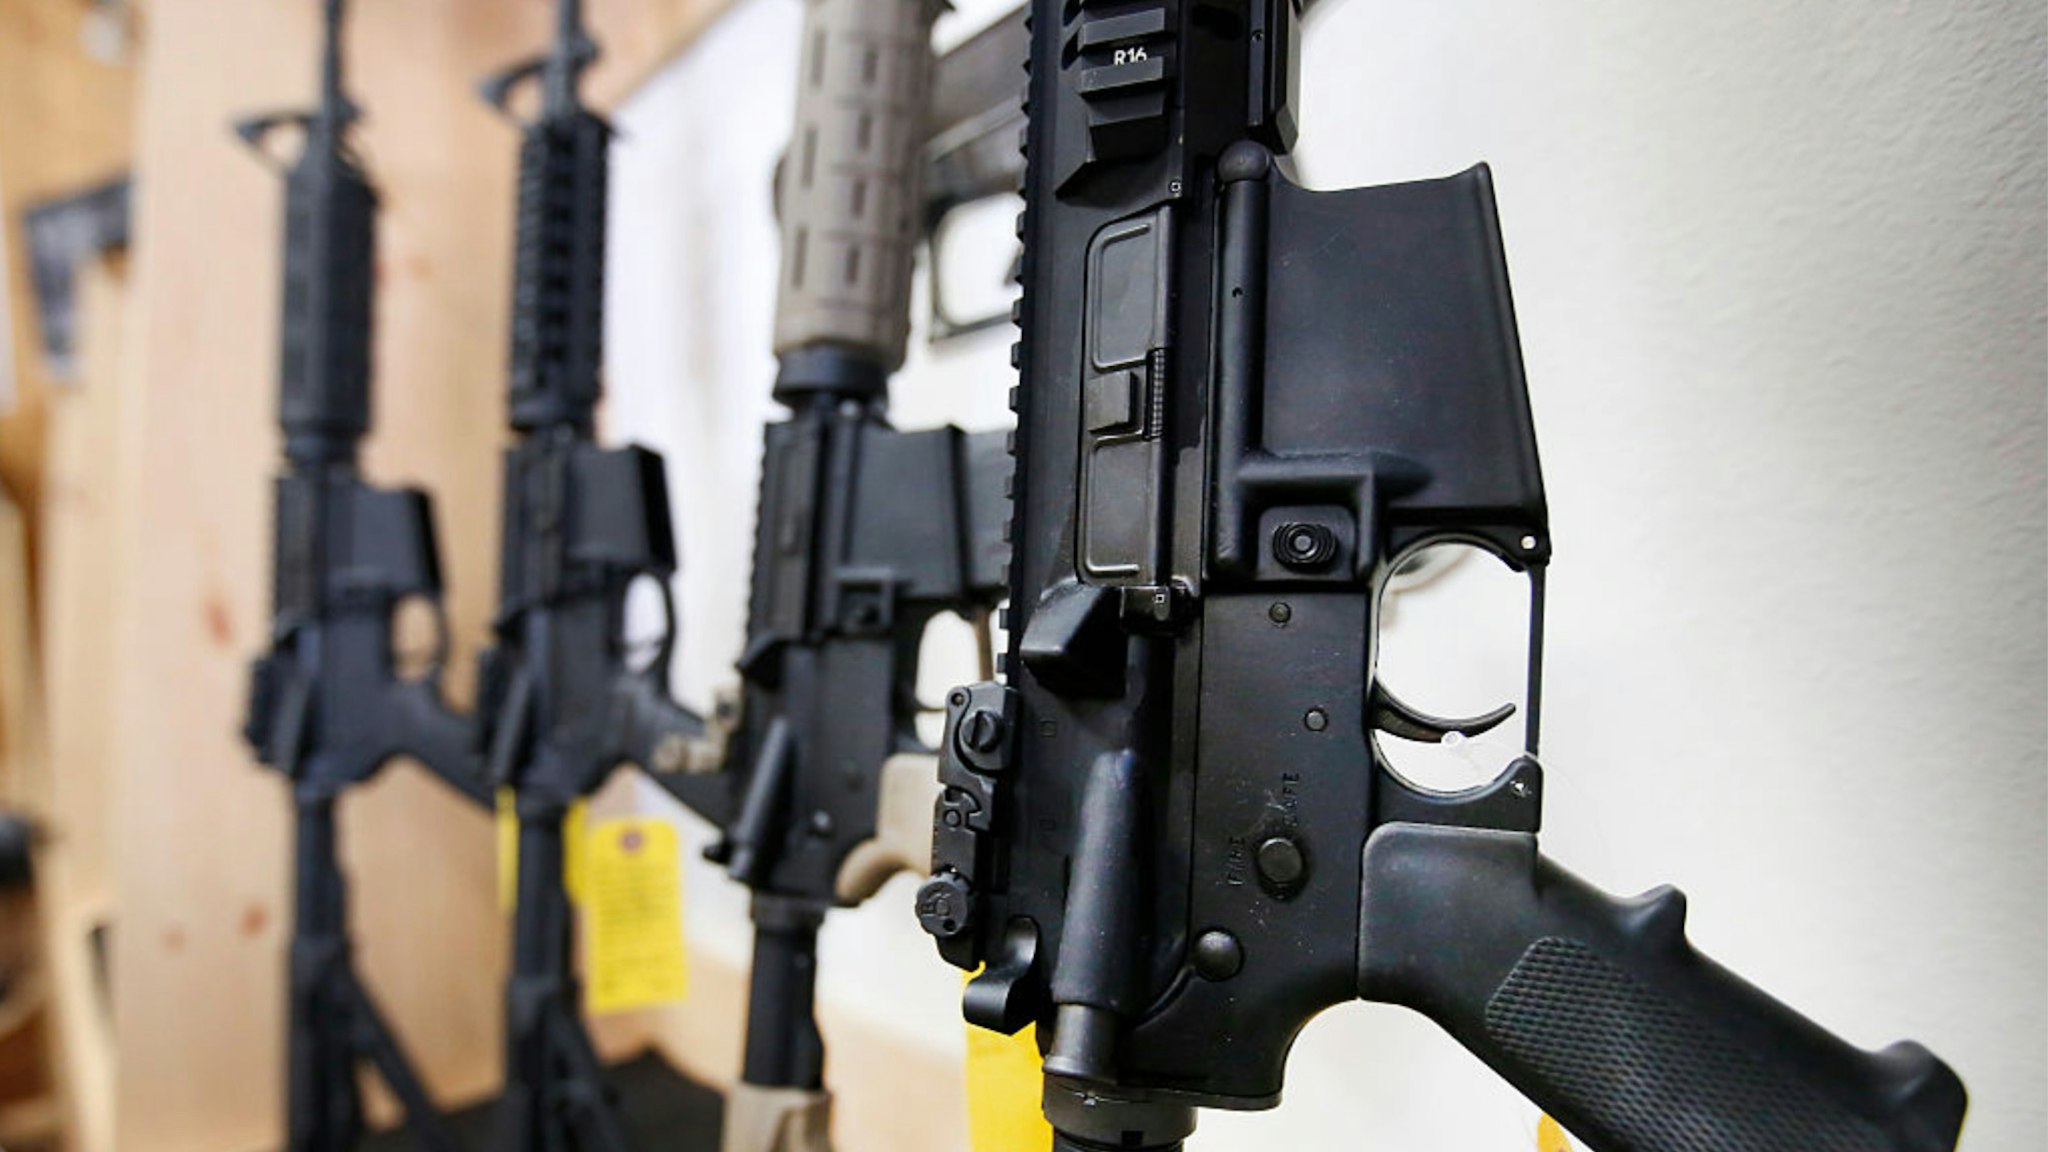 AR-15 semi-automatic guns are on display for sale at Action Target on June 17, 2016 in Springville, Utah.